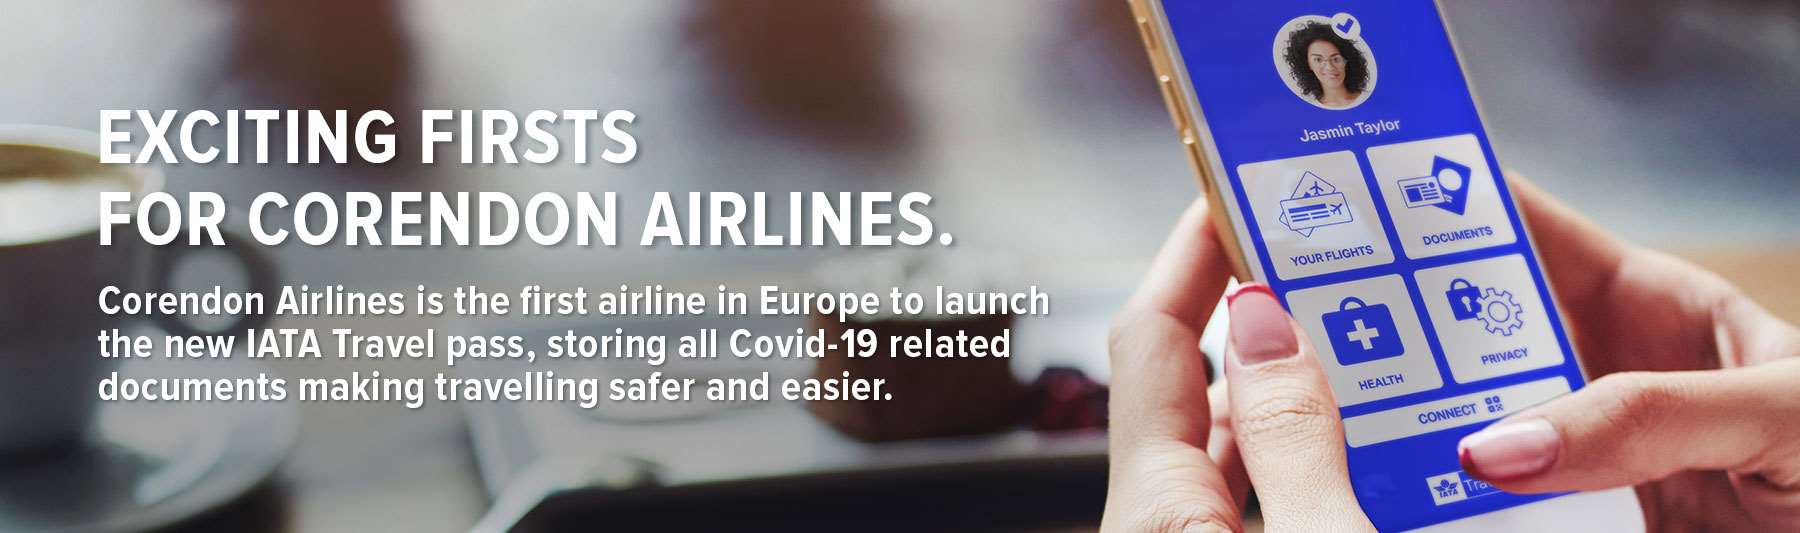 Corendon Airlines becomes the first airlines in Europe to launch IATA Travel Pass after a successful trial